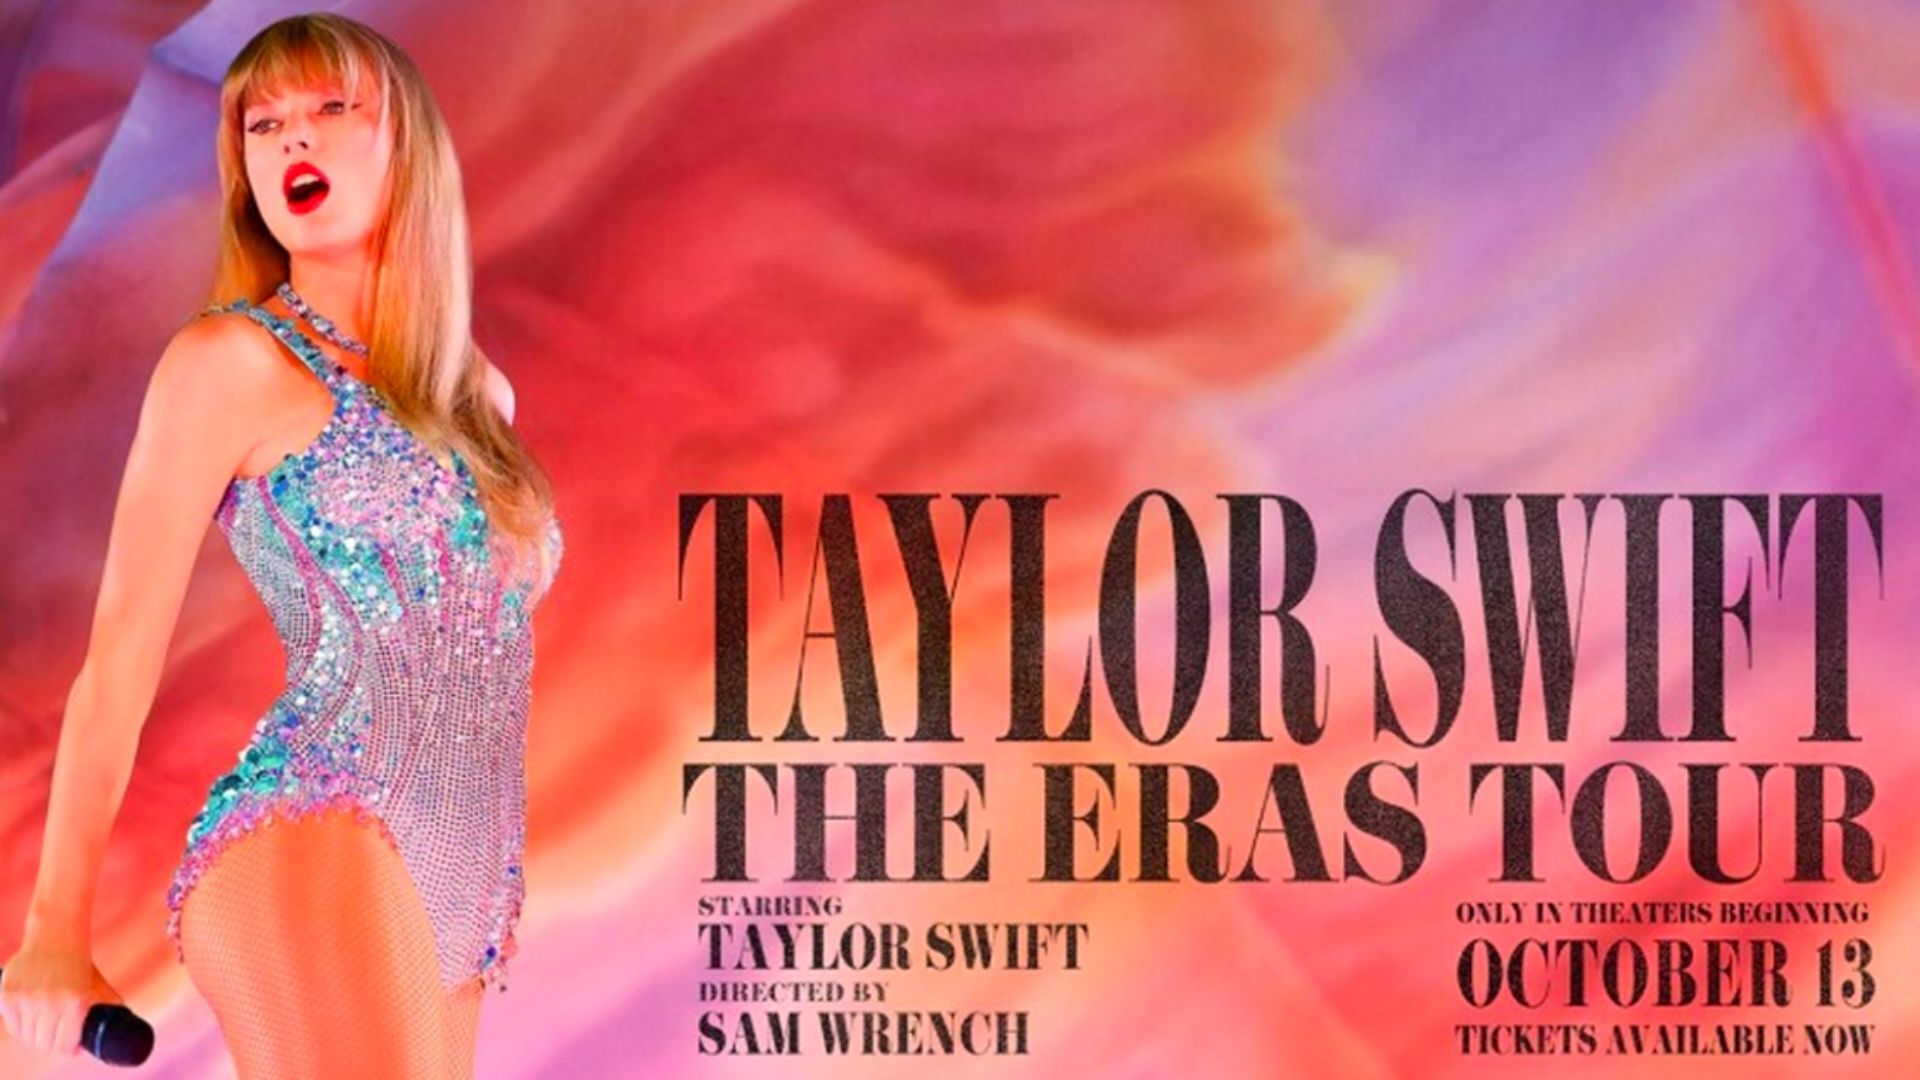 Taylor Swift: The Eras Tour” film made $6.2 million JUST in